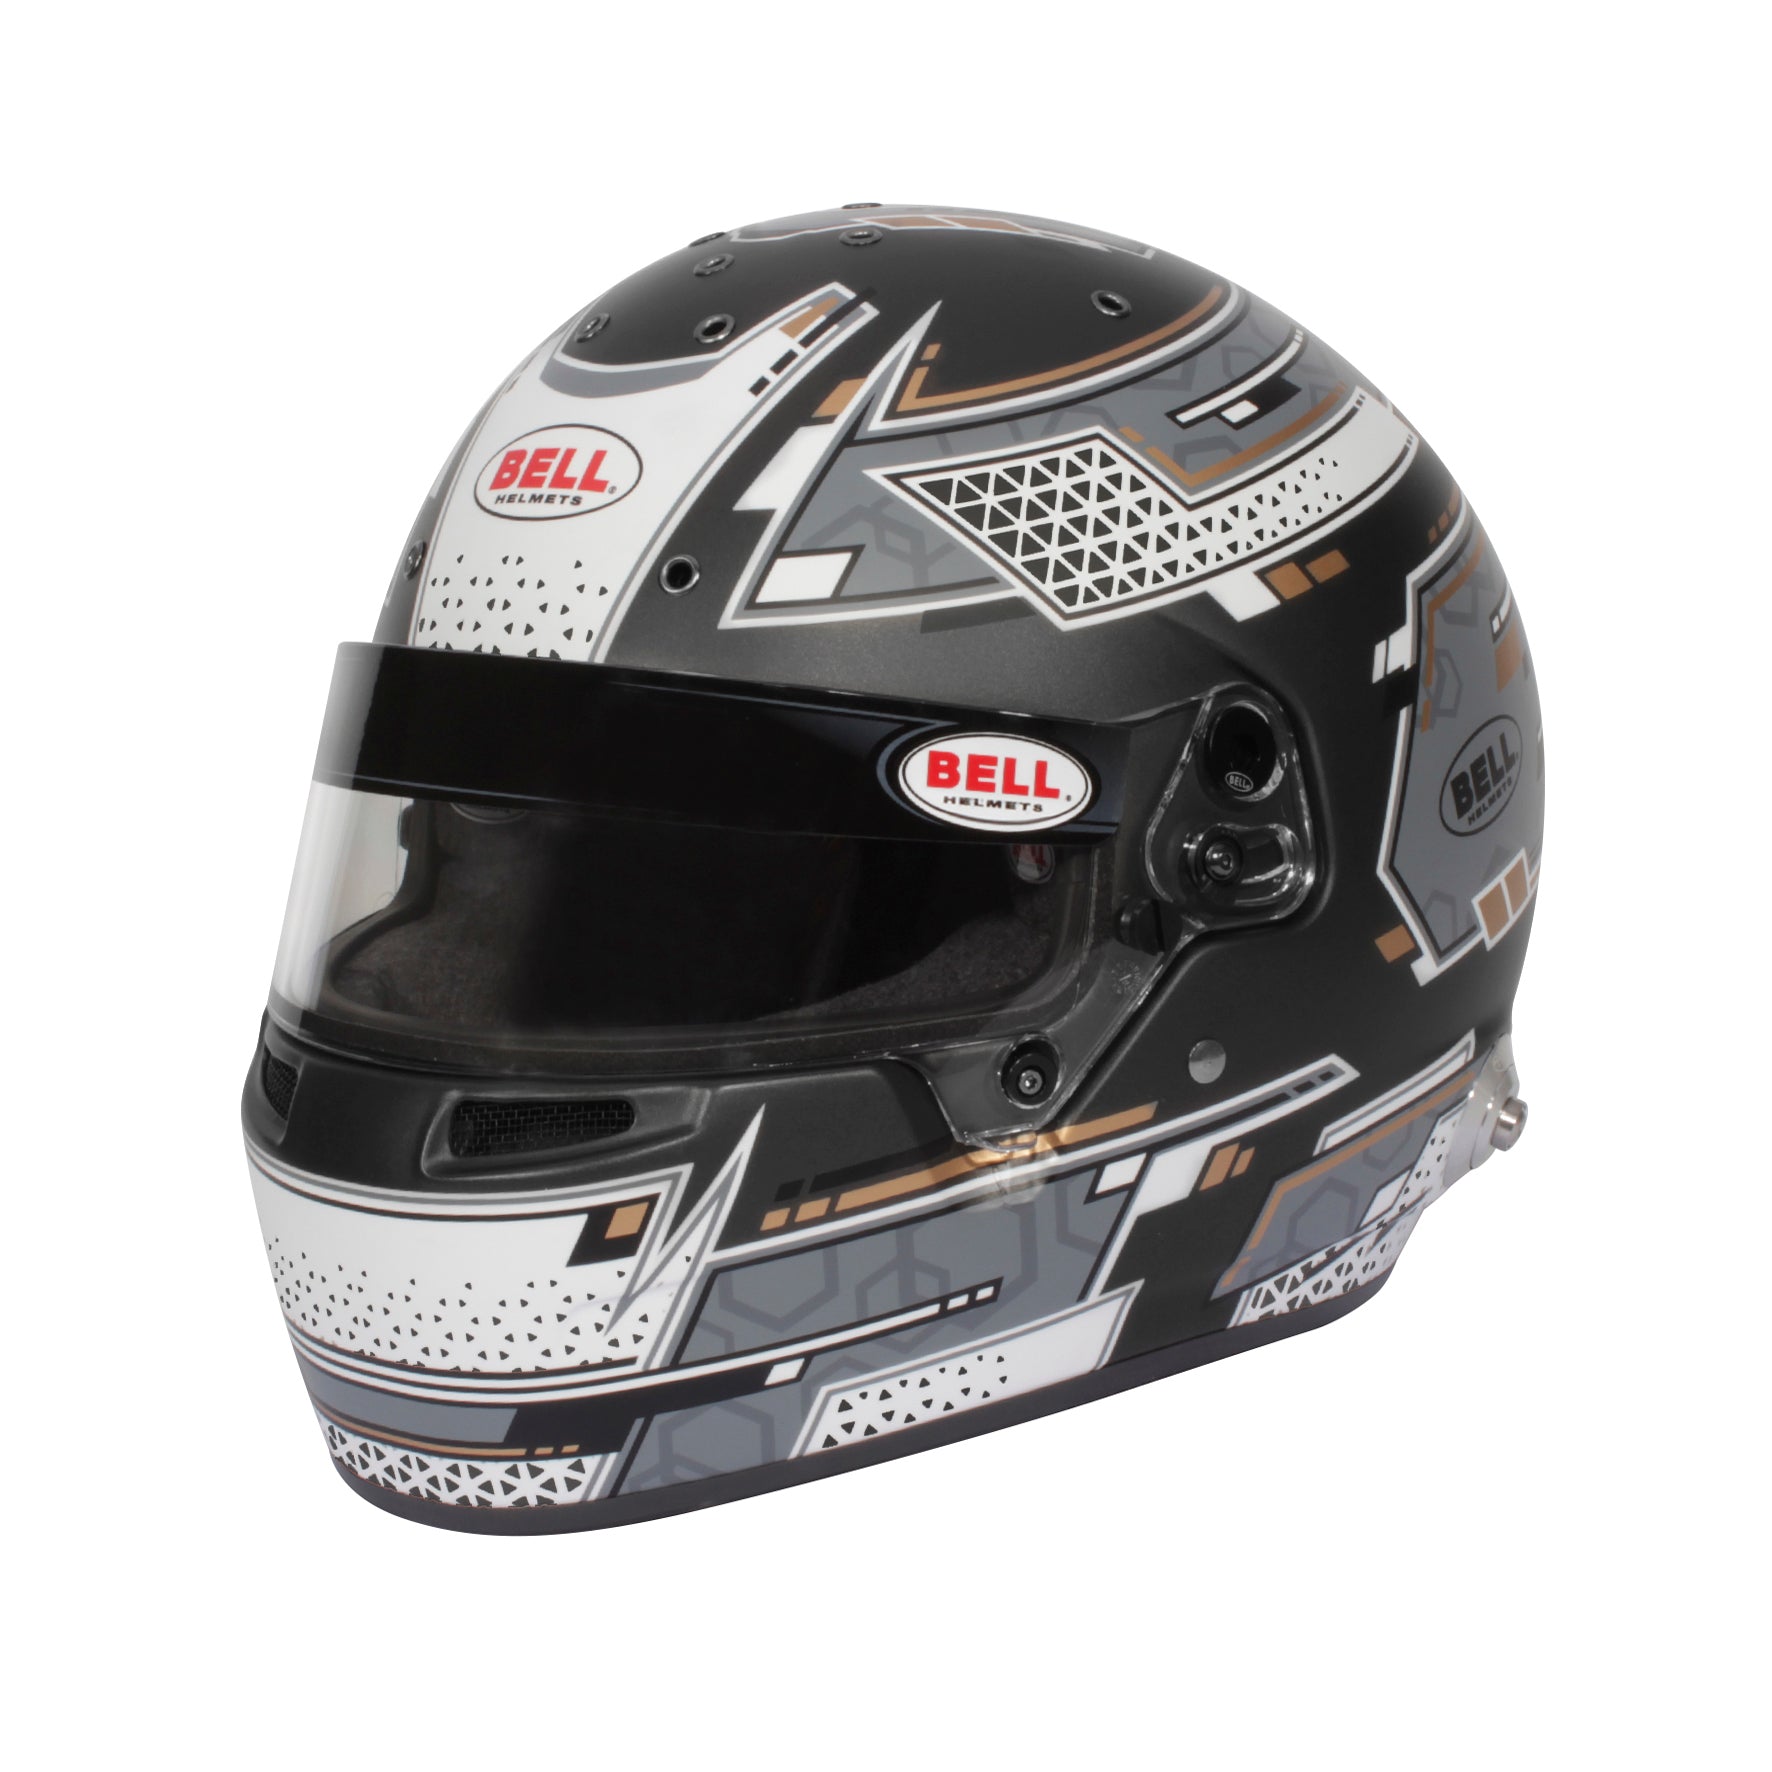 BELL 1310A56 RS7 STAMINA GREY Racing helmet full face, HANS, FIA8859-2015, size 60 (7 1/2) Photo-0 